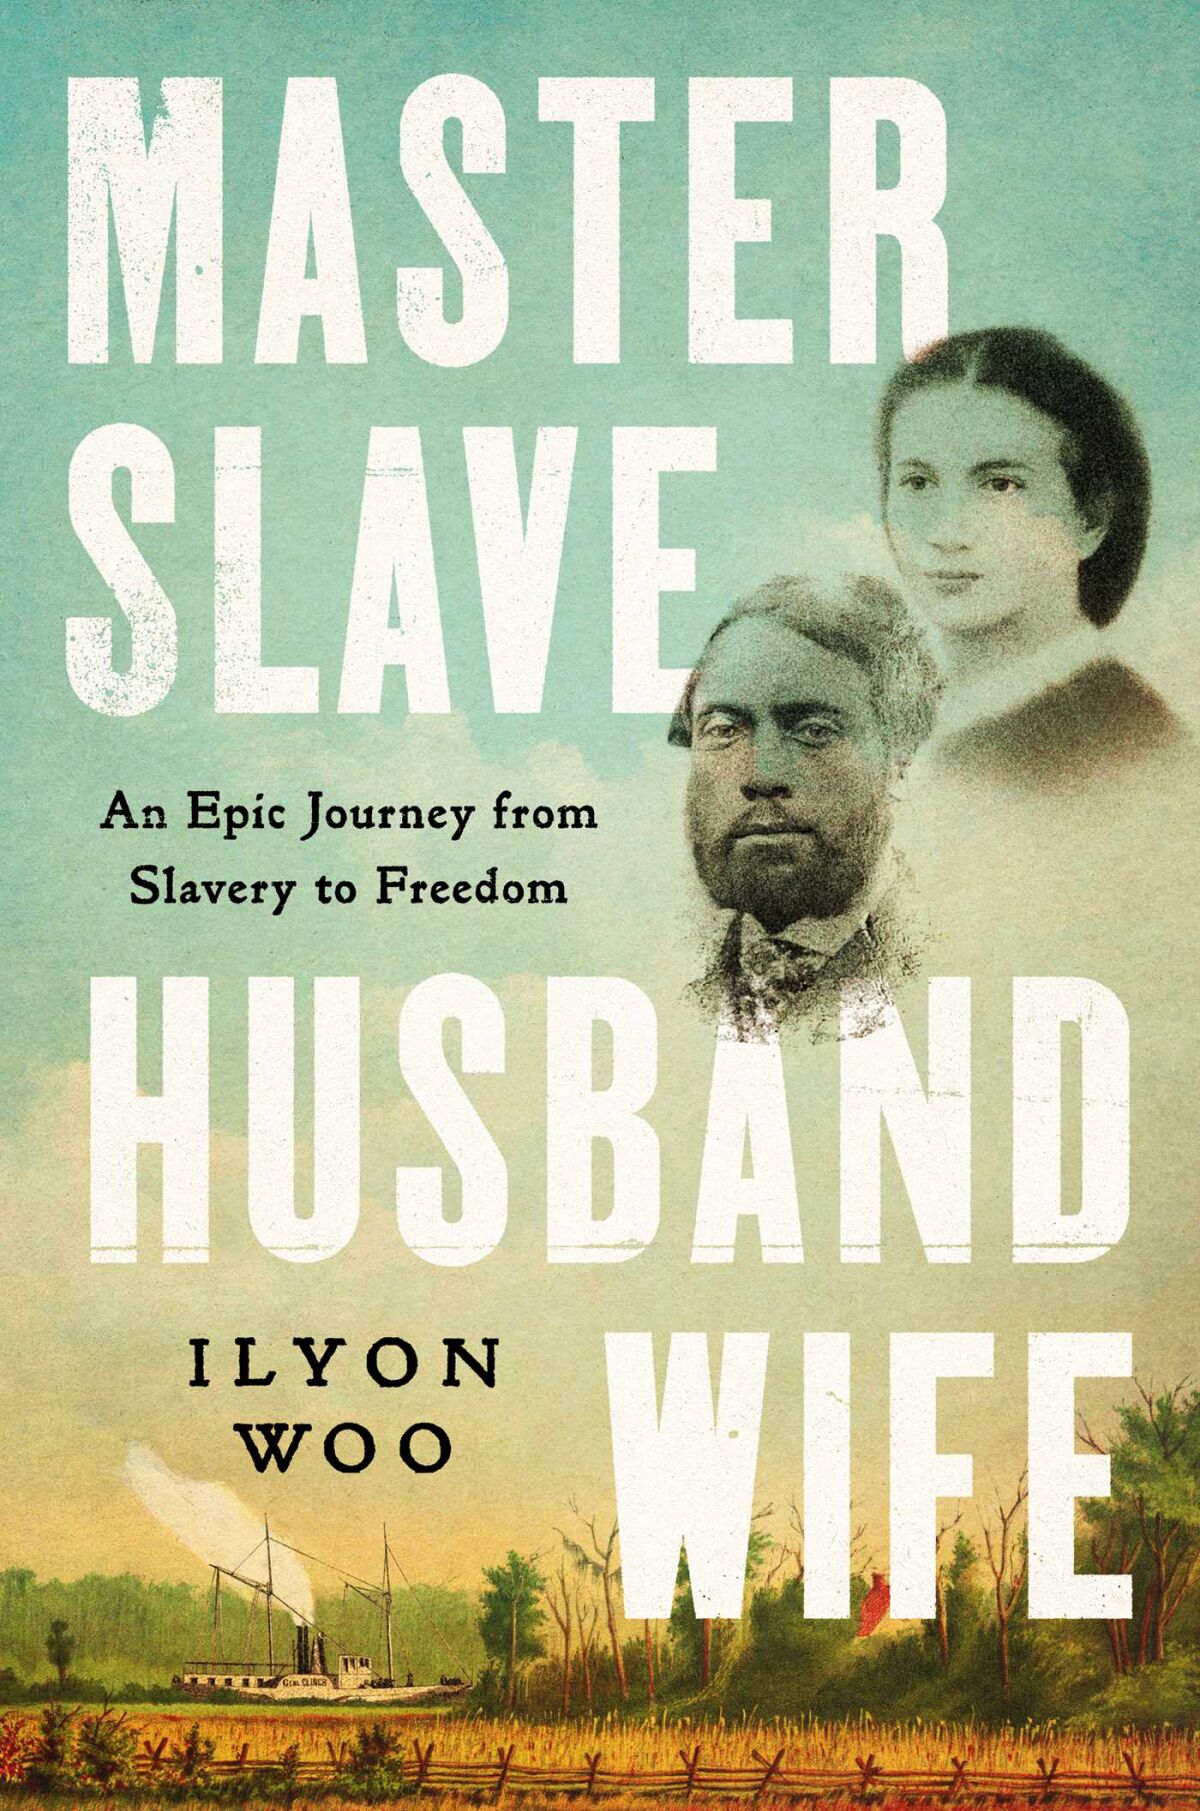 'Master Slave Husband Wife: An Epic Journey from Slavery to Freedom' by Ilyon Woo.